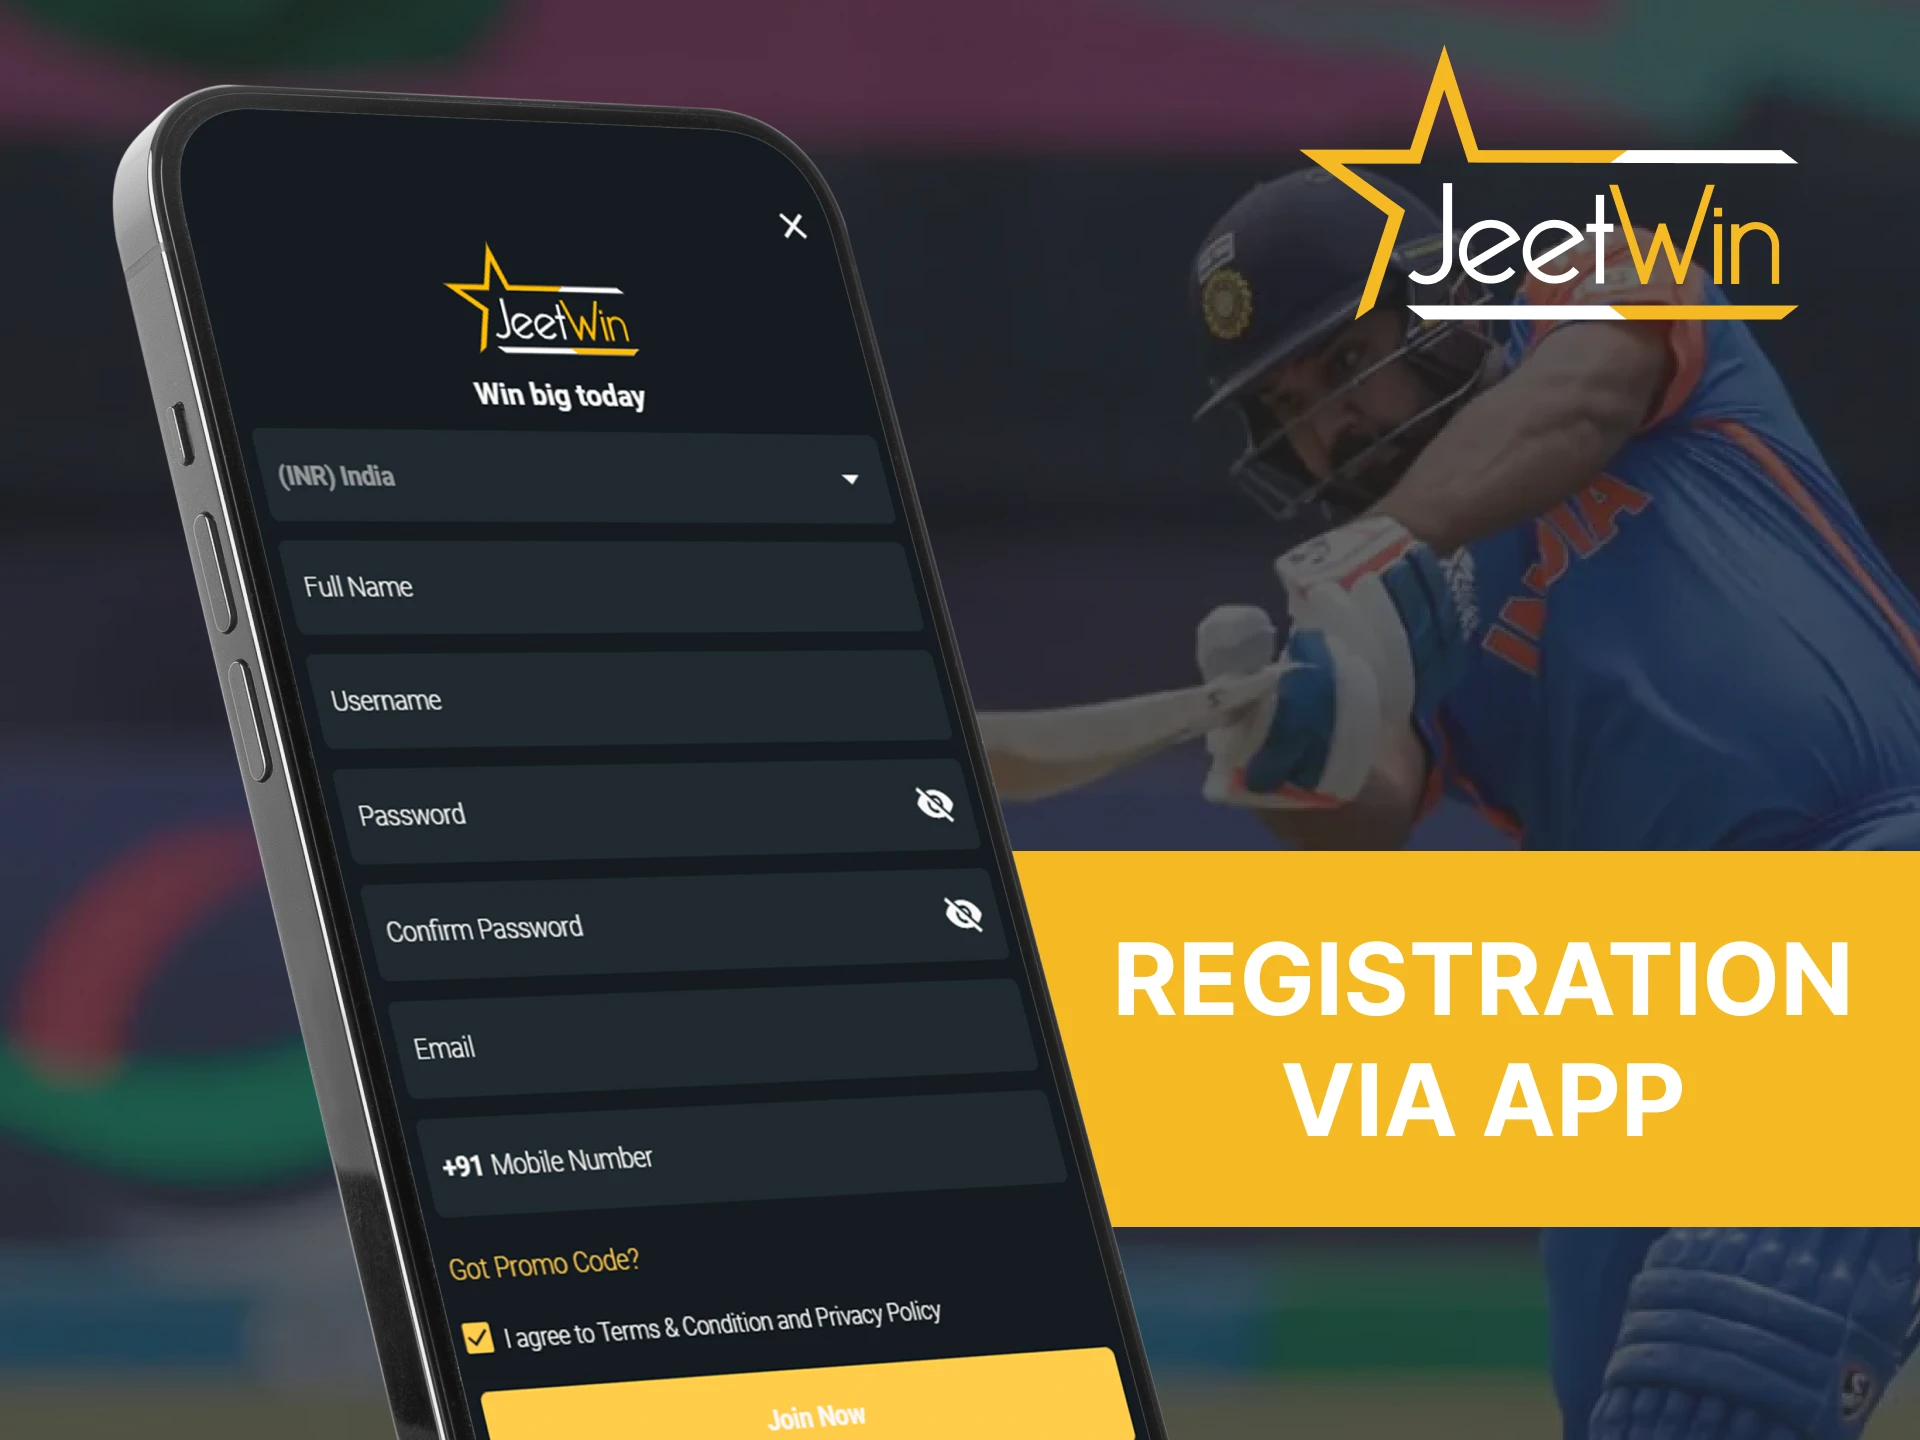 Register with Jeetwin using the mobile app.